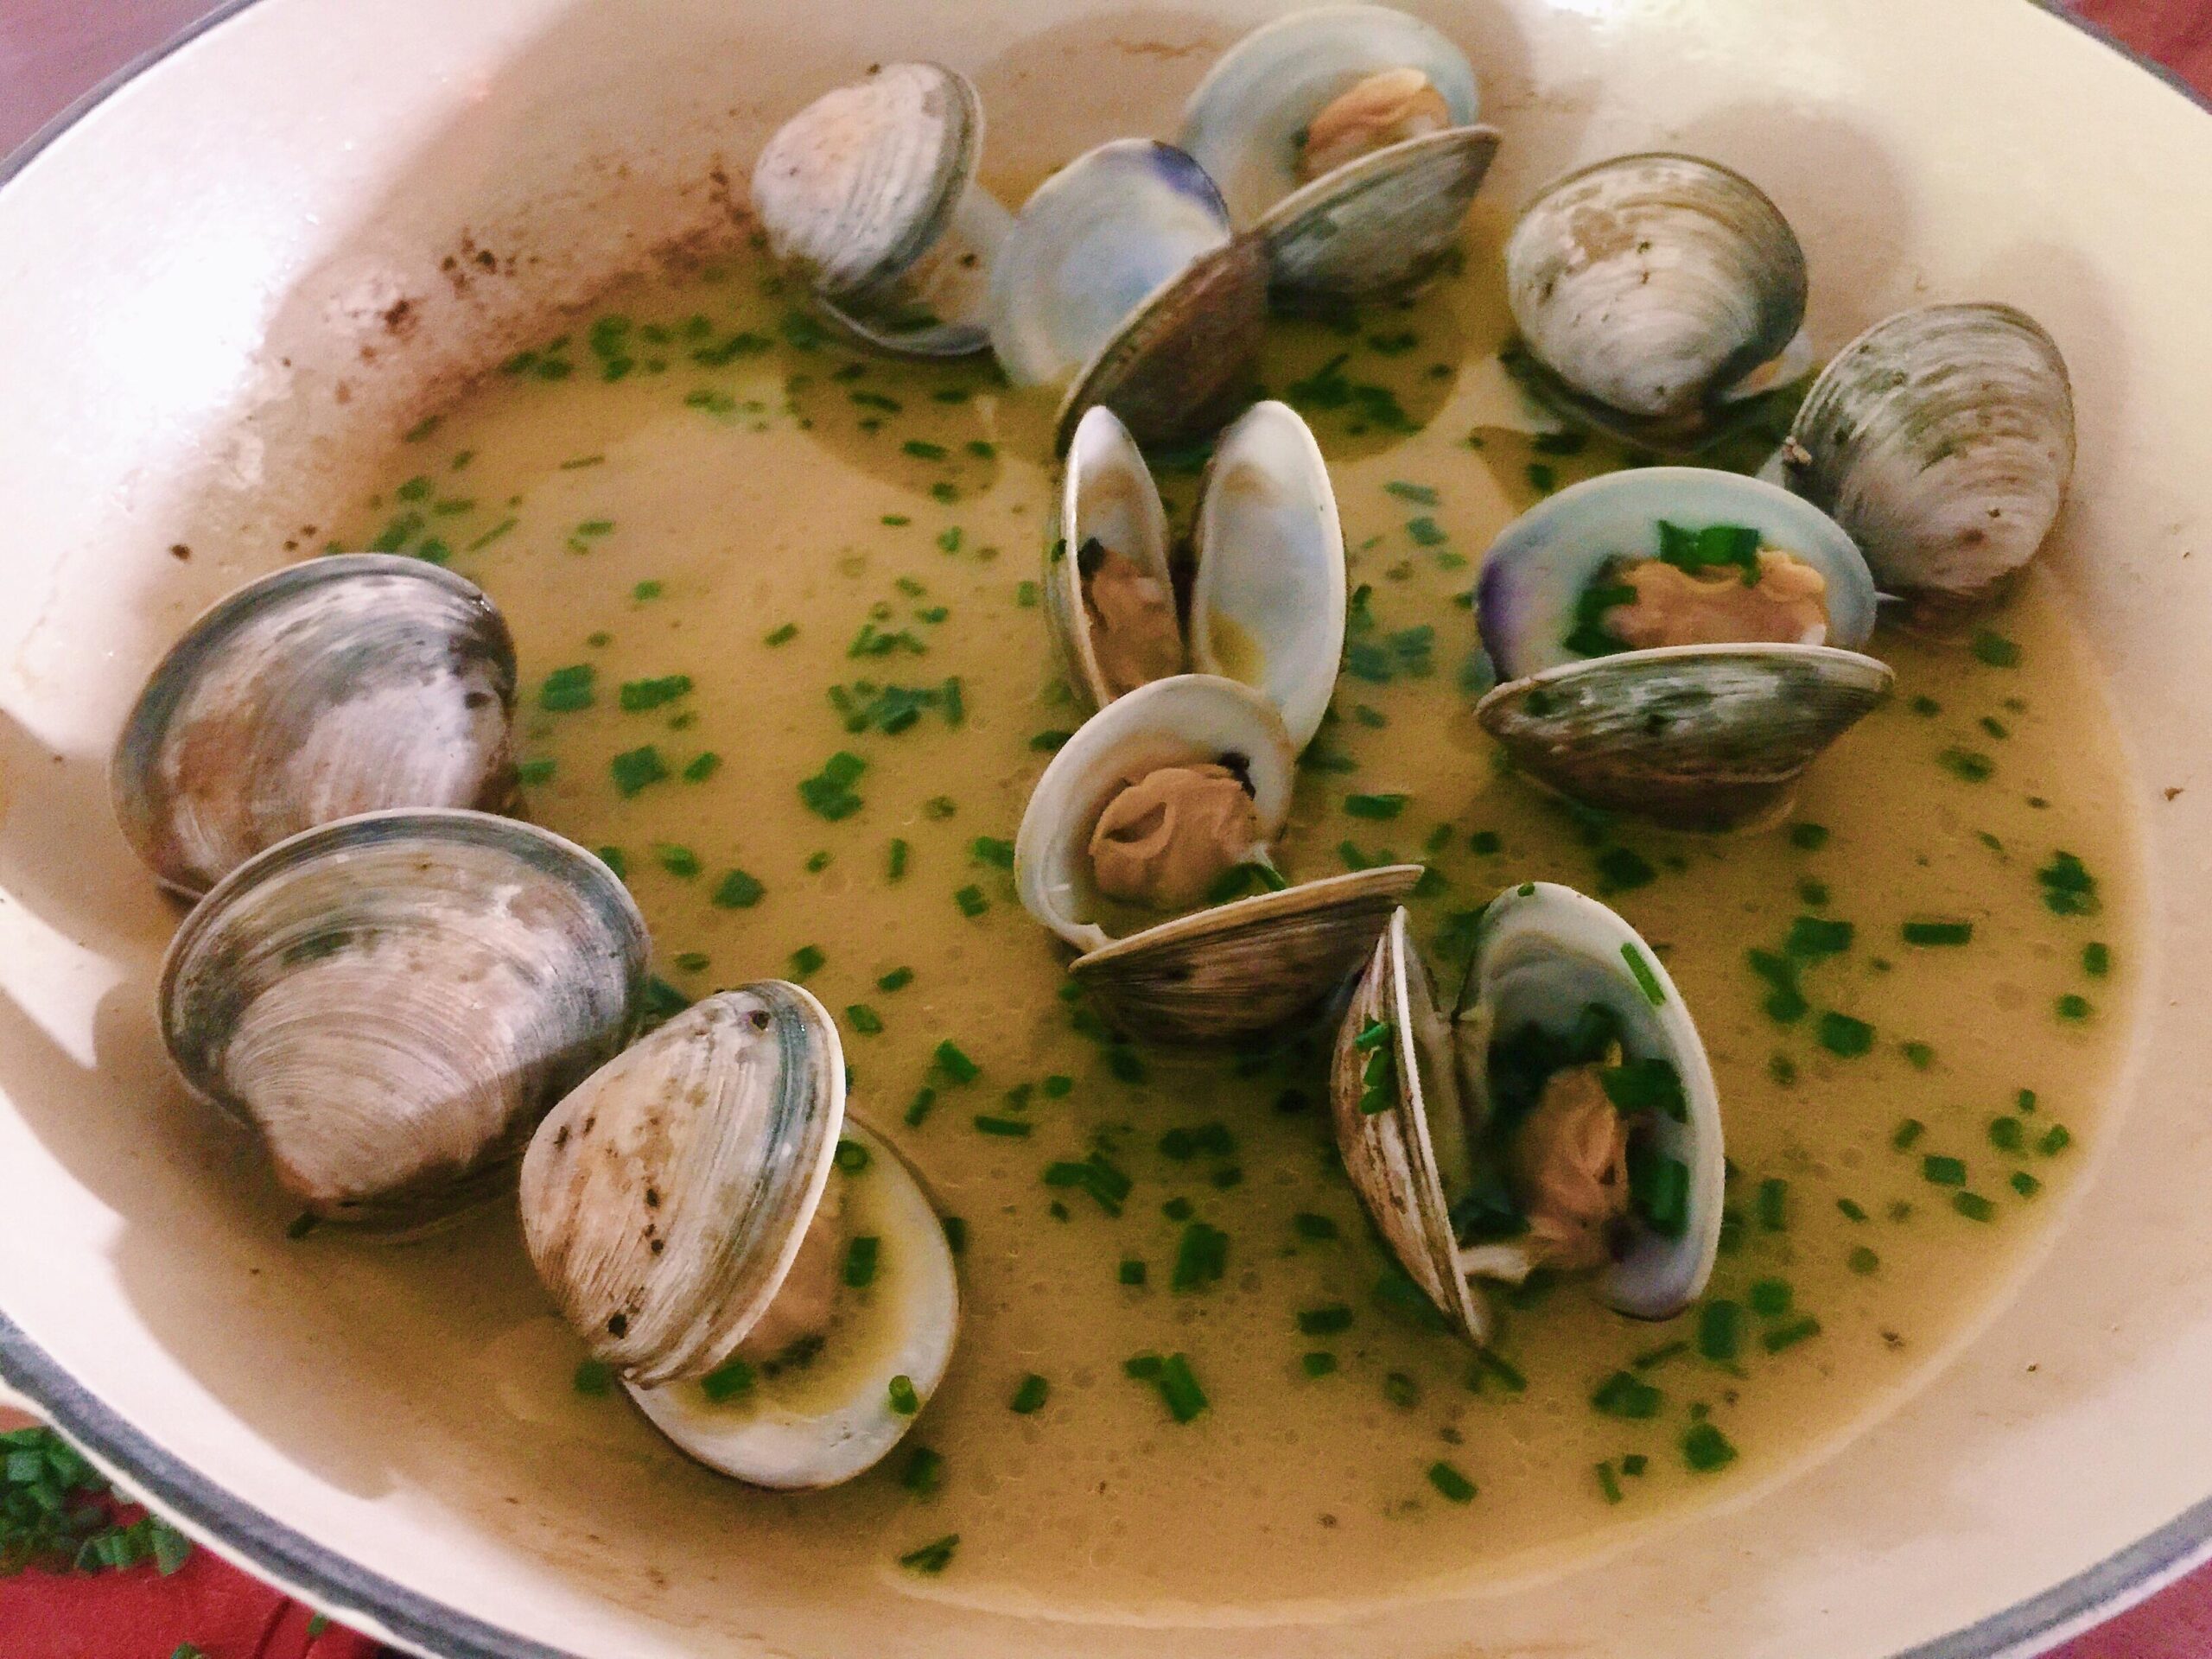  Drown your sorrows in a bowl full of plump clams soaked in a tangy white wine sauce.